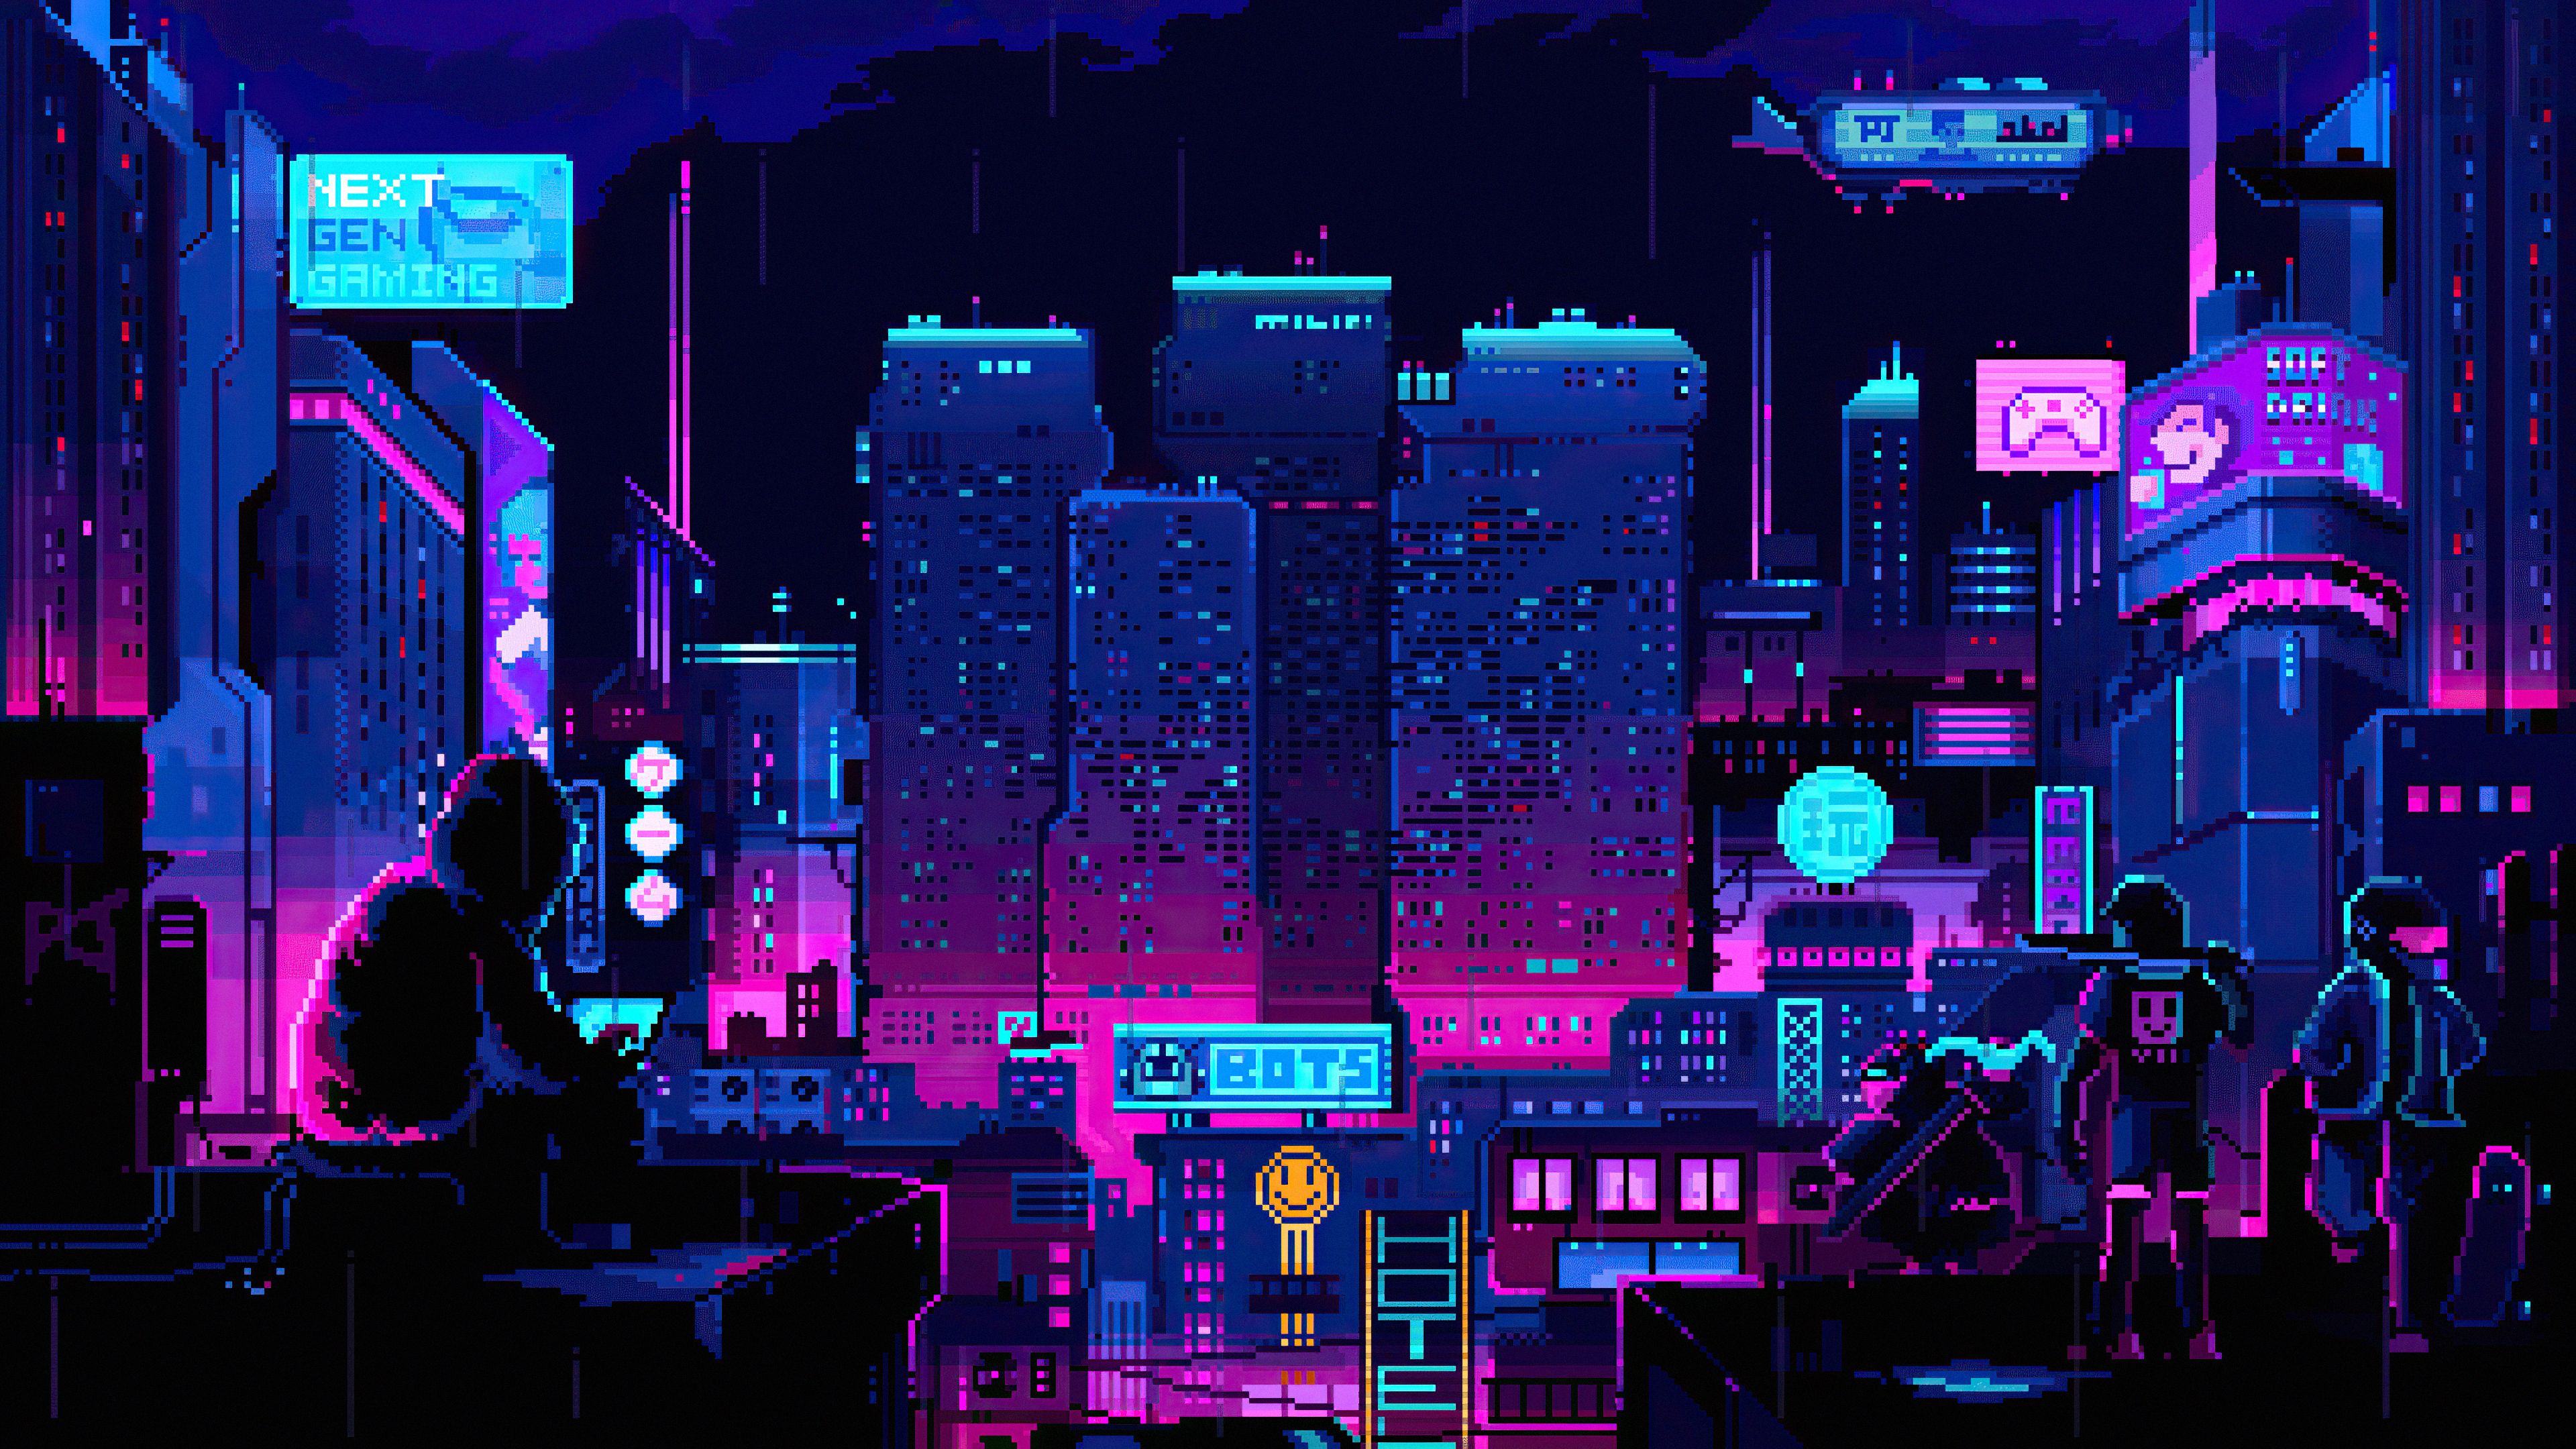 A city scene with people walking around at night - Pixel art, gaming, Cyberpunk